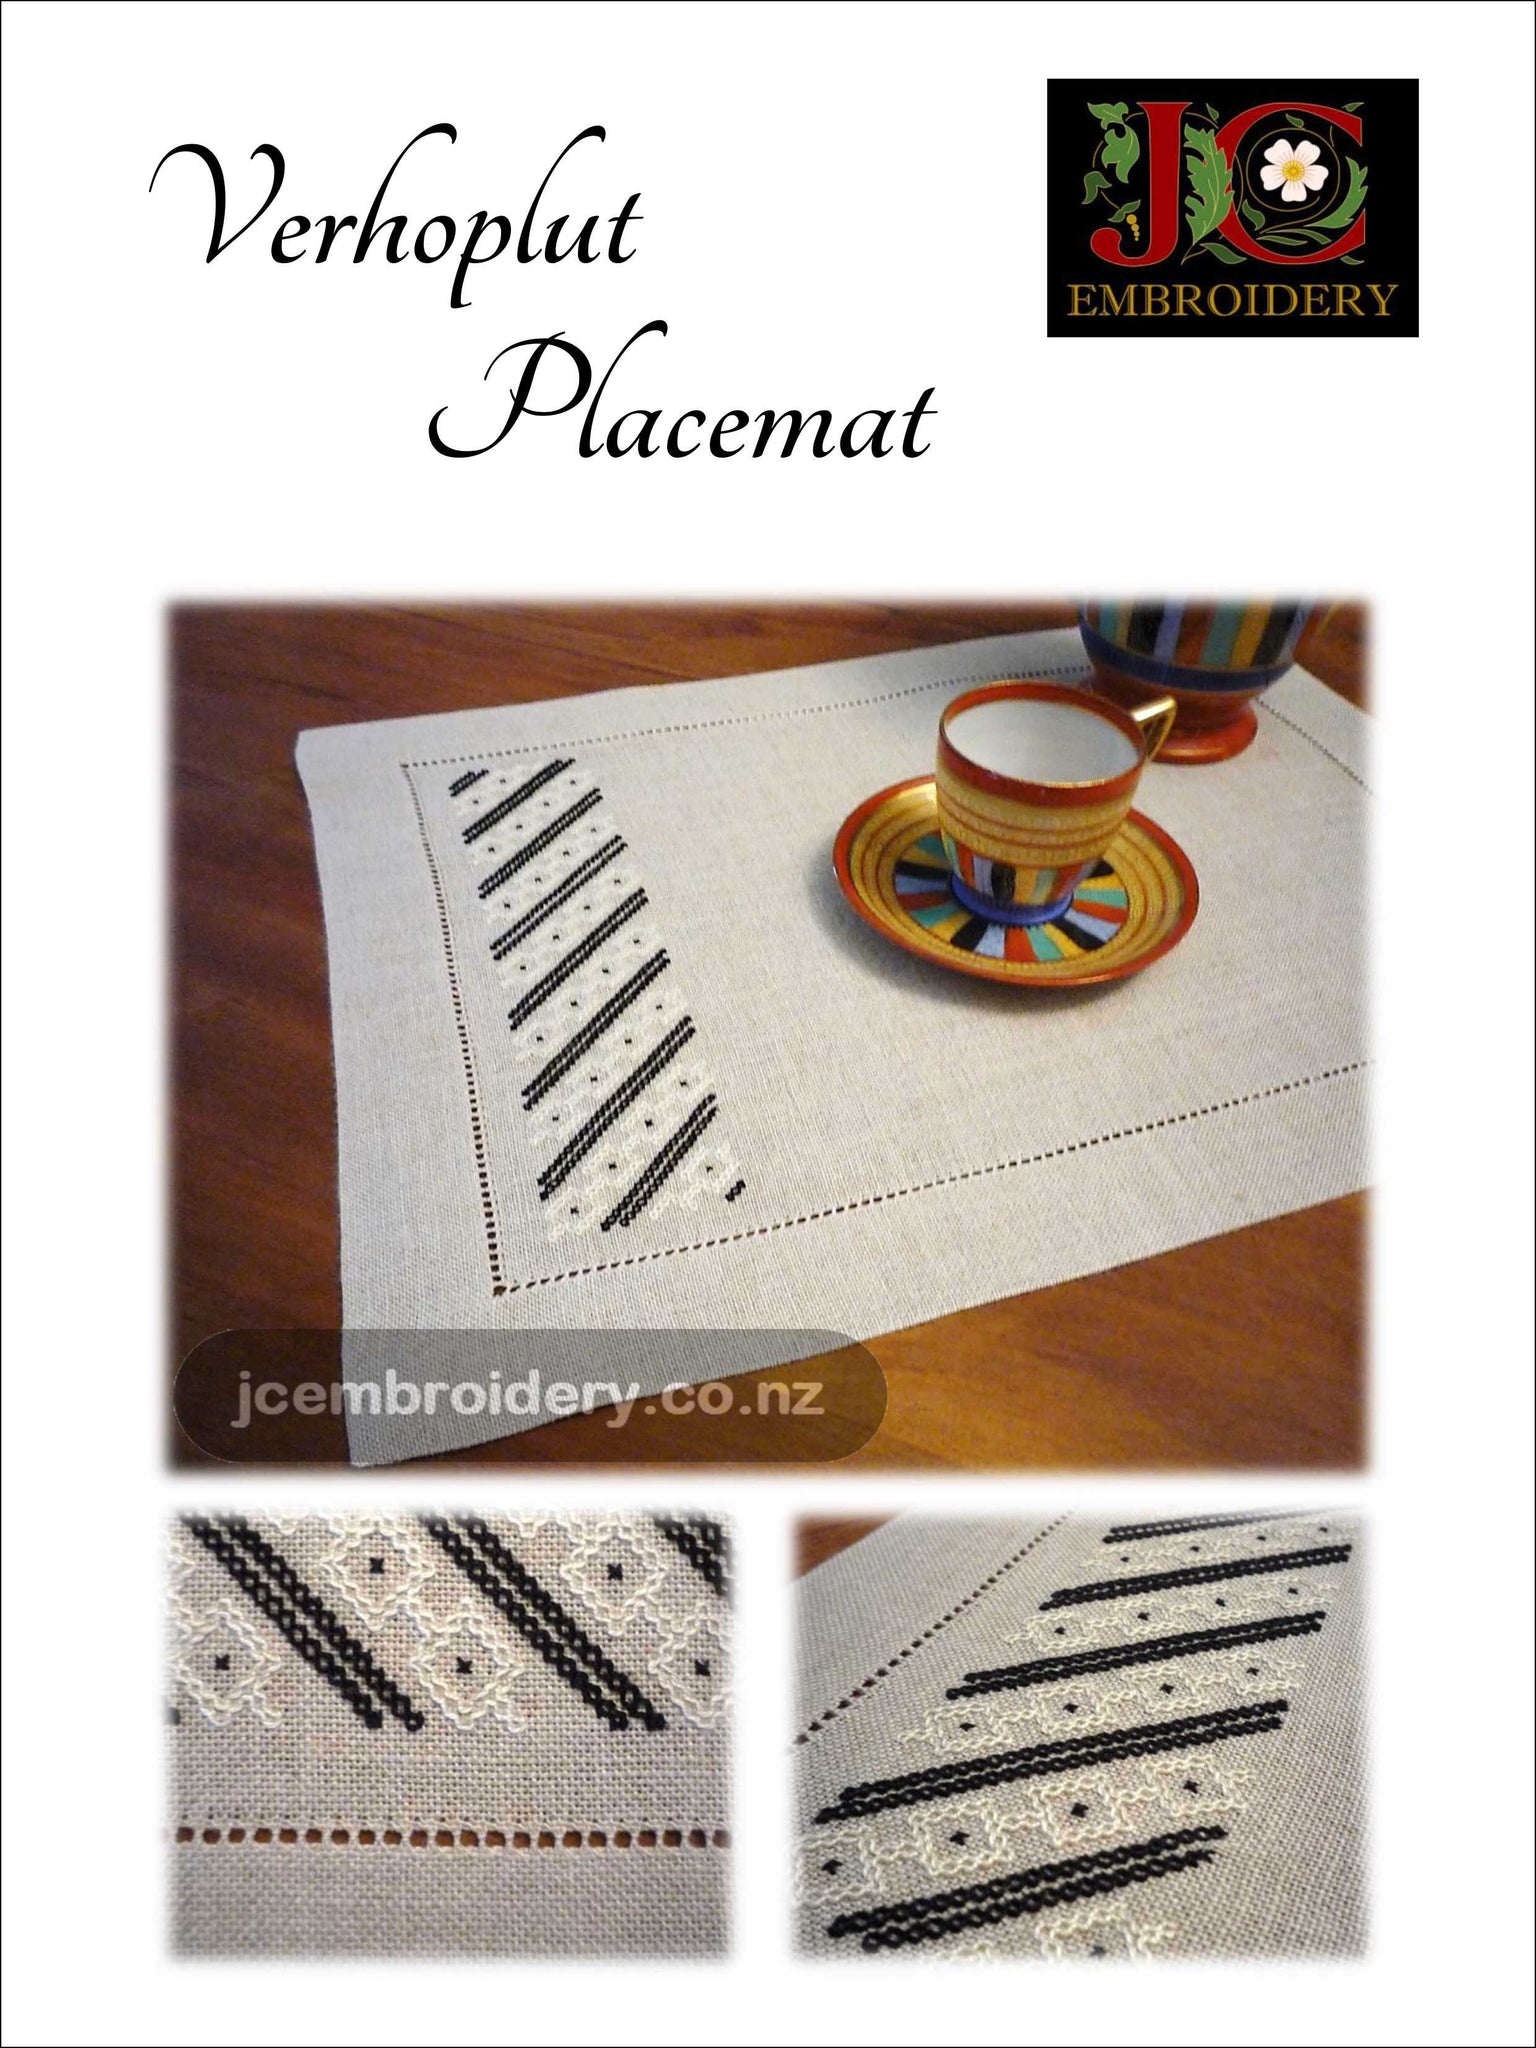 Verhoplut Placemat -  #2 in the Placemat Series